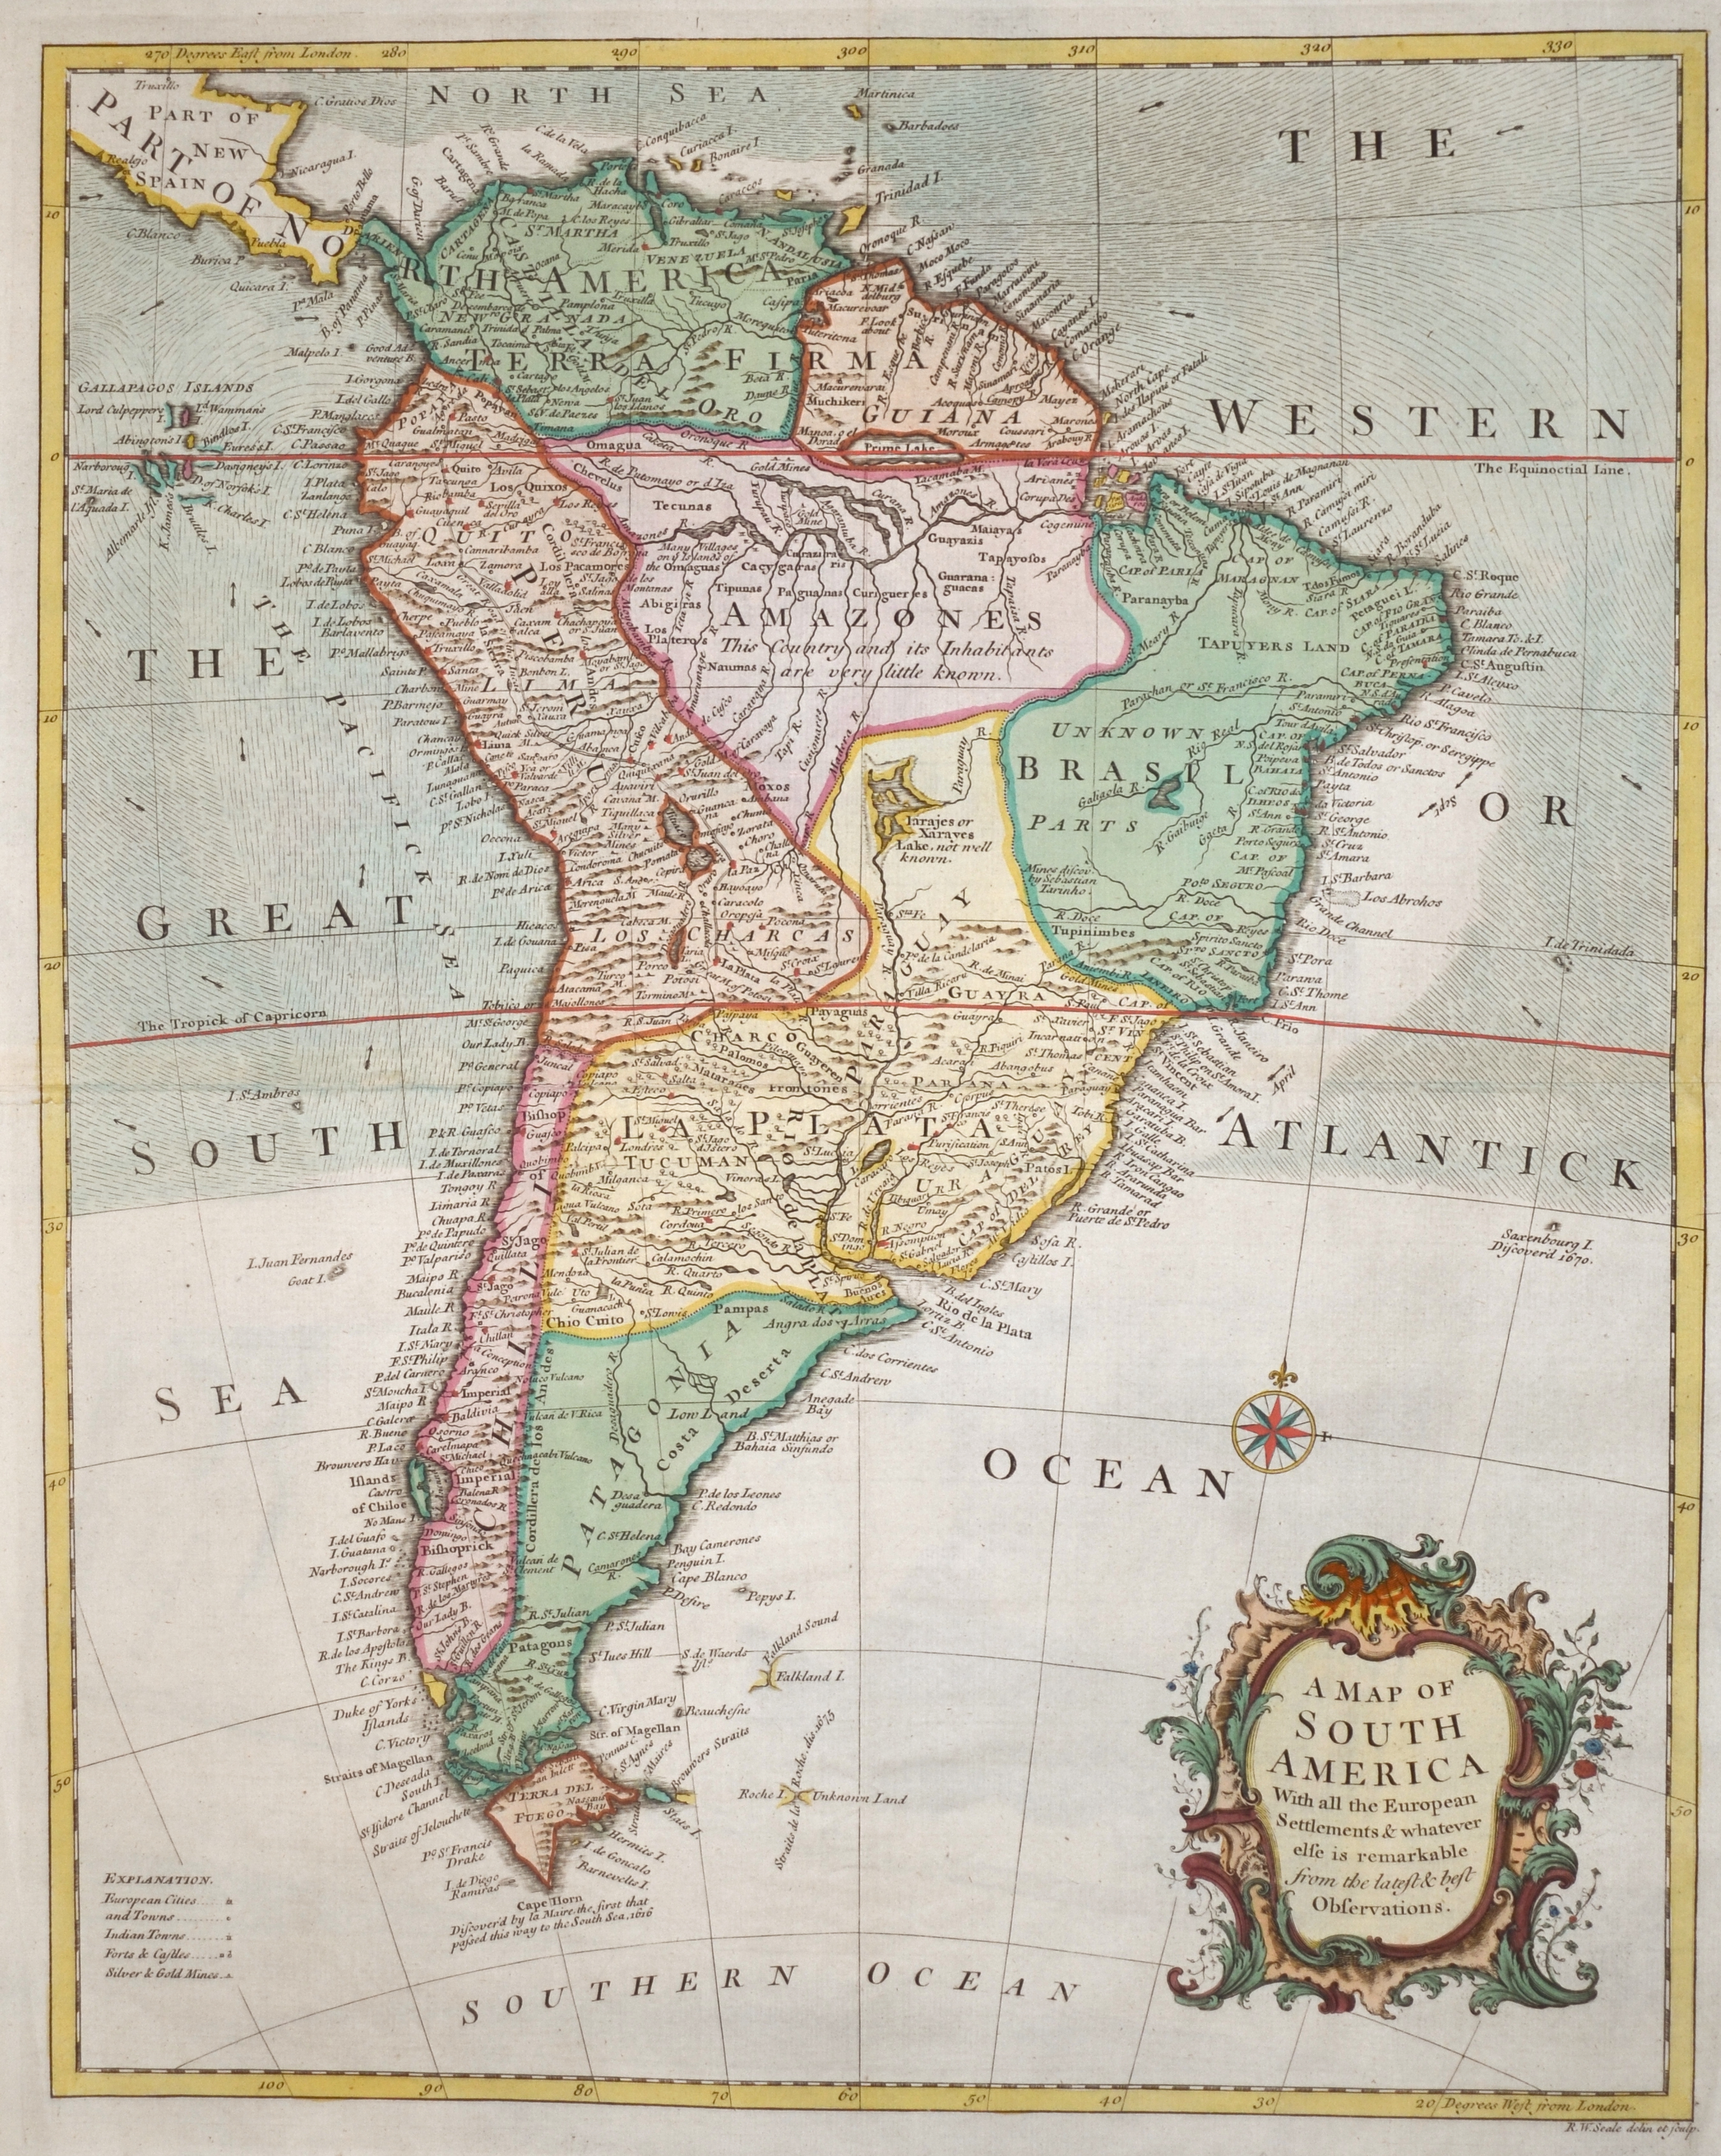 Seale R. W. A Map of South America With all the European Settlements & whatever else is remarkable